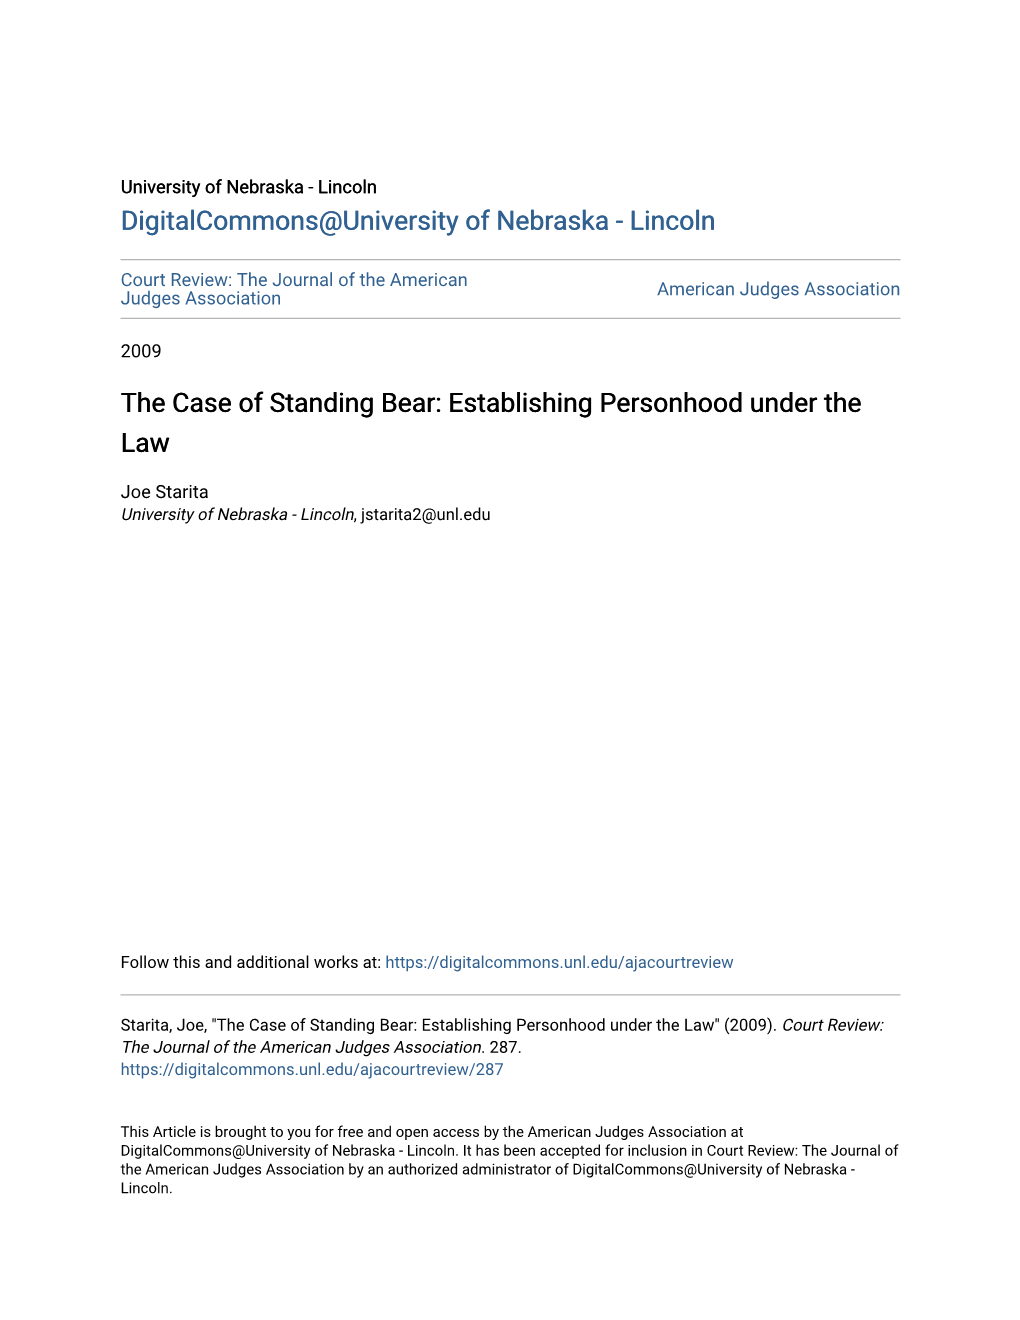 The Case of Standing Bear: Establishing Personhood Under the Law